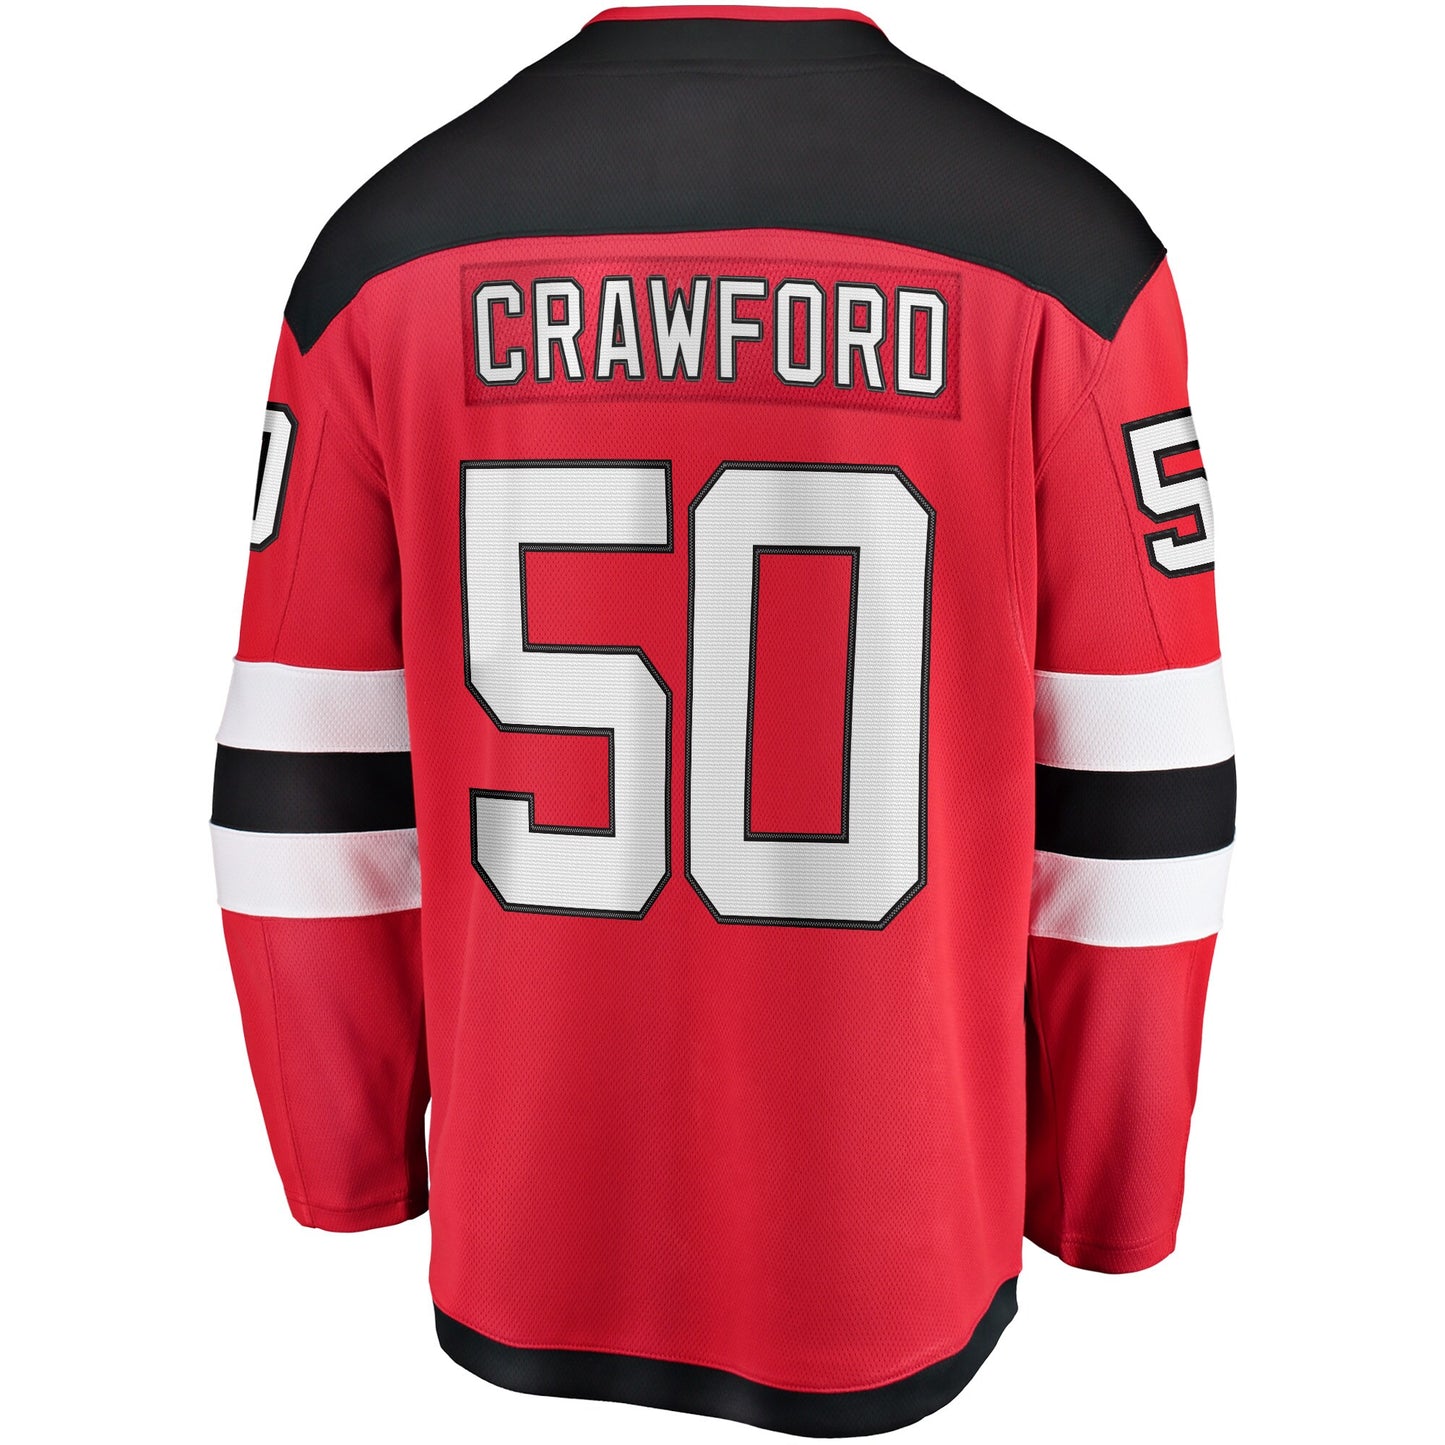 Corey Crawford New Jersey Devils Fanatics Branded Youth Breakaway Player Jersey - Red